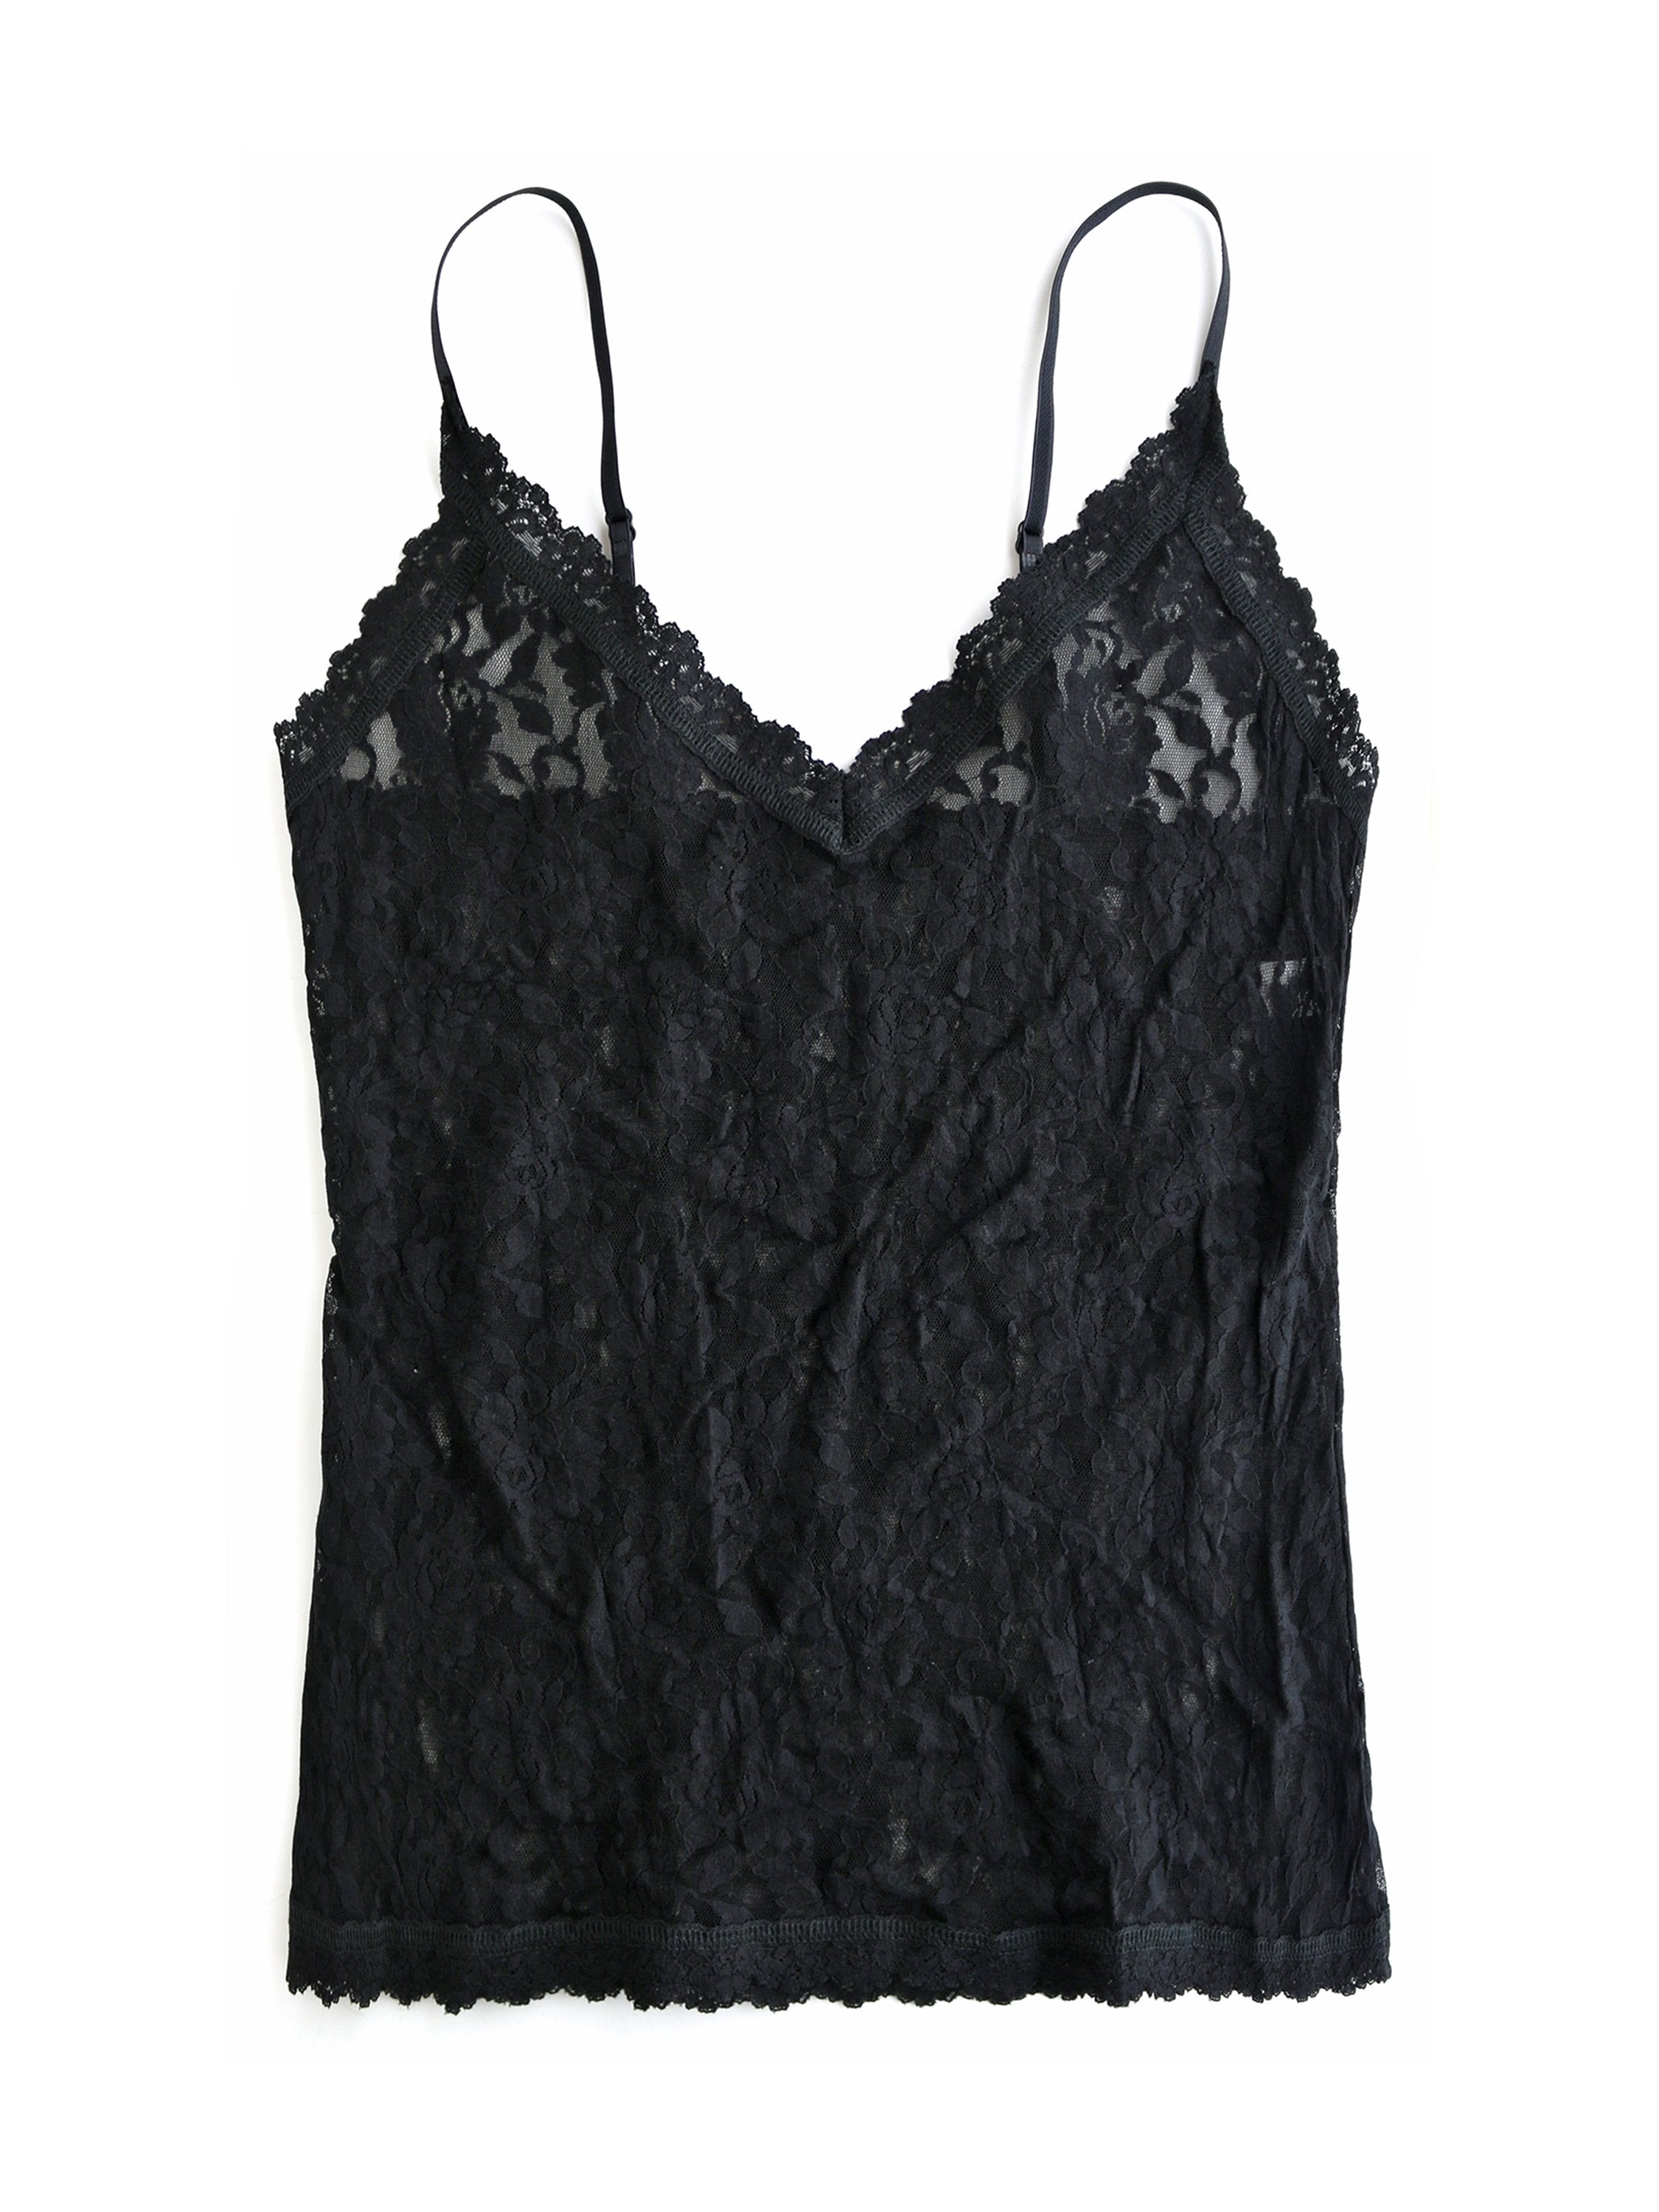 Hanky Panky Sheer Lace Camisole 484731 - ShopStyle